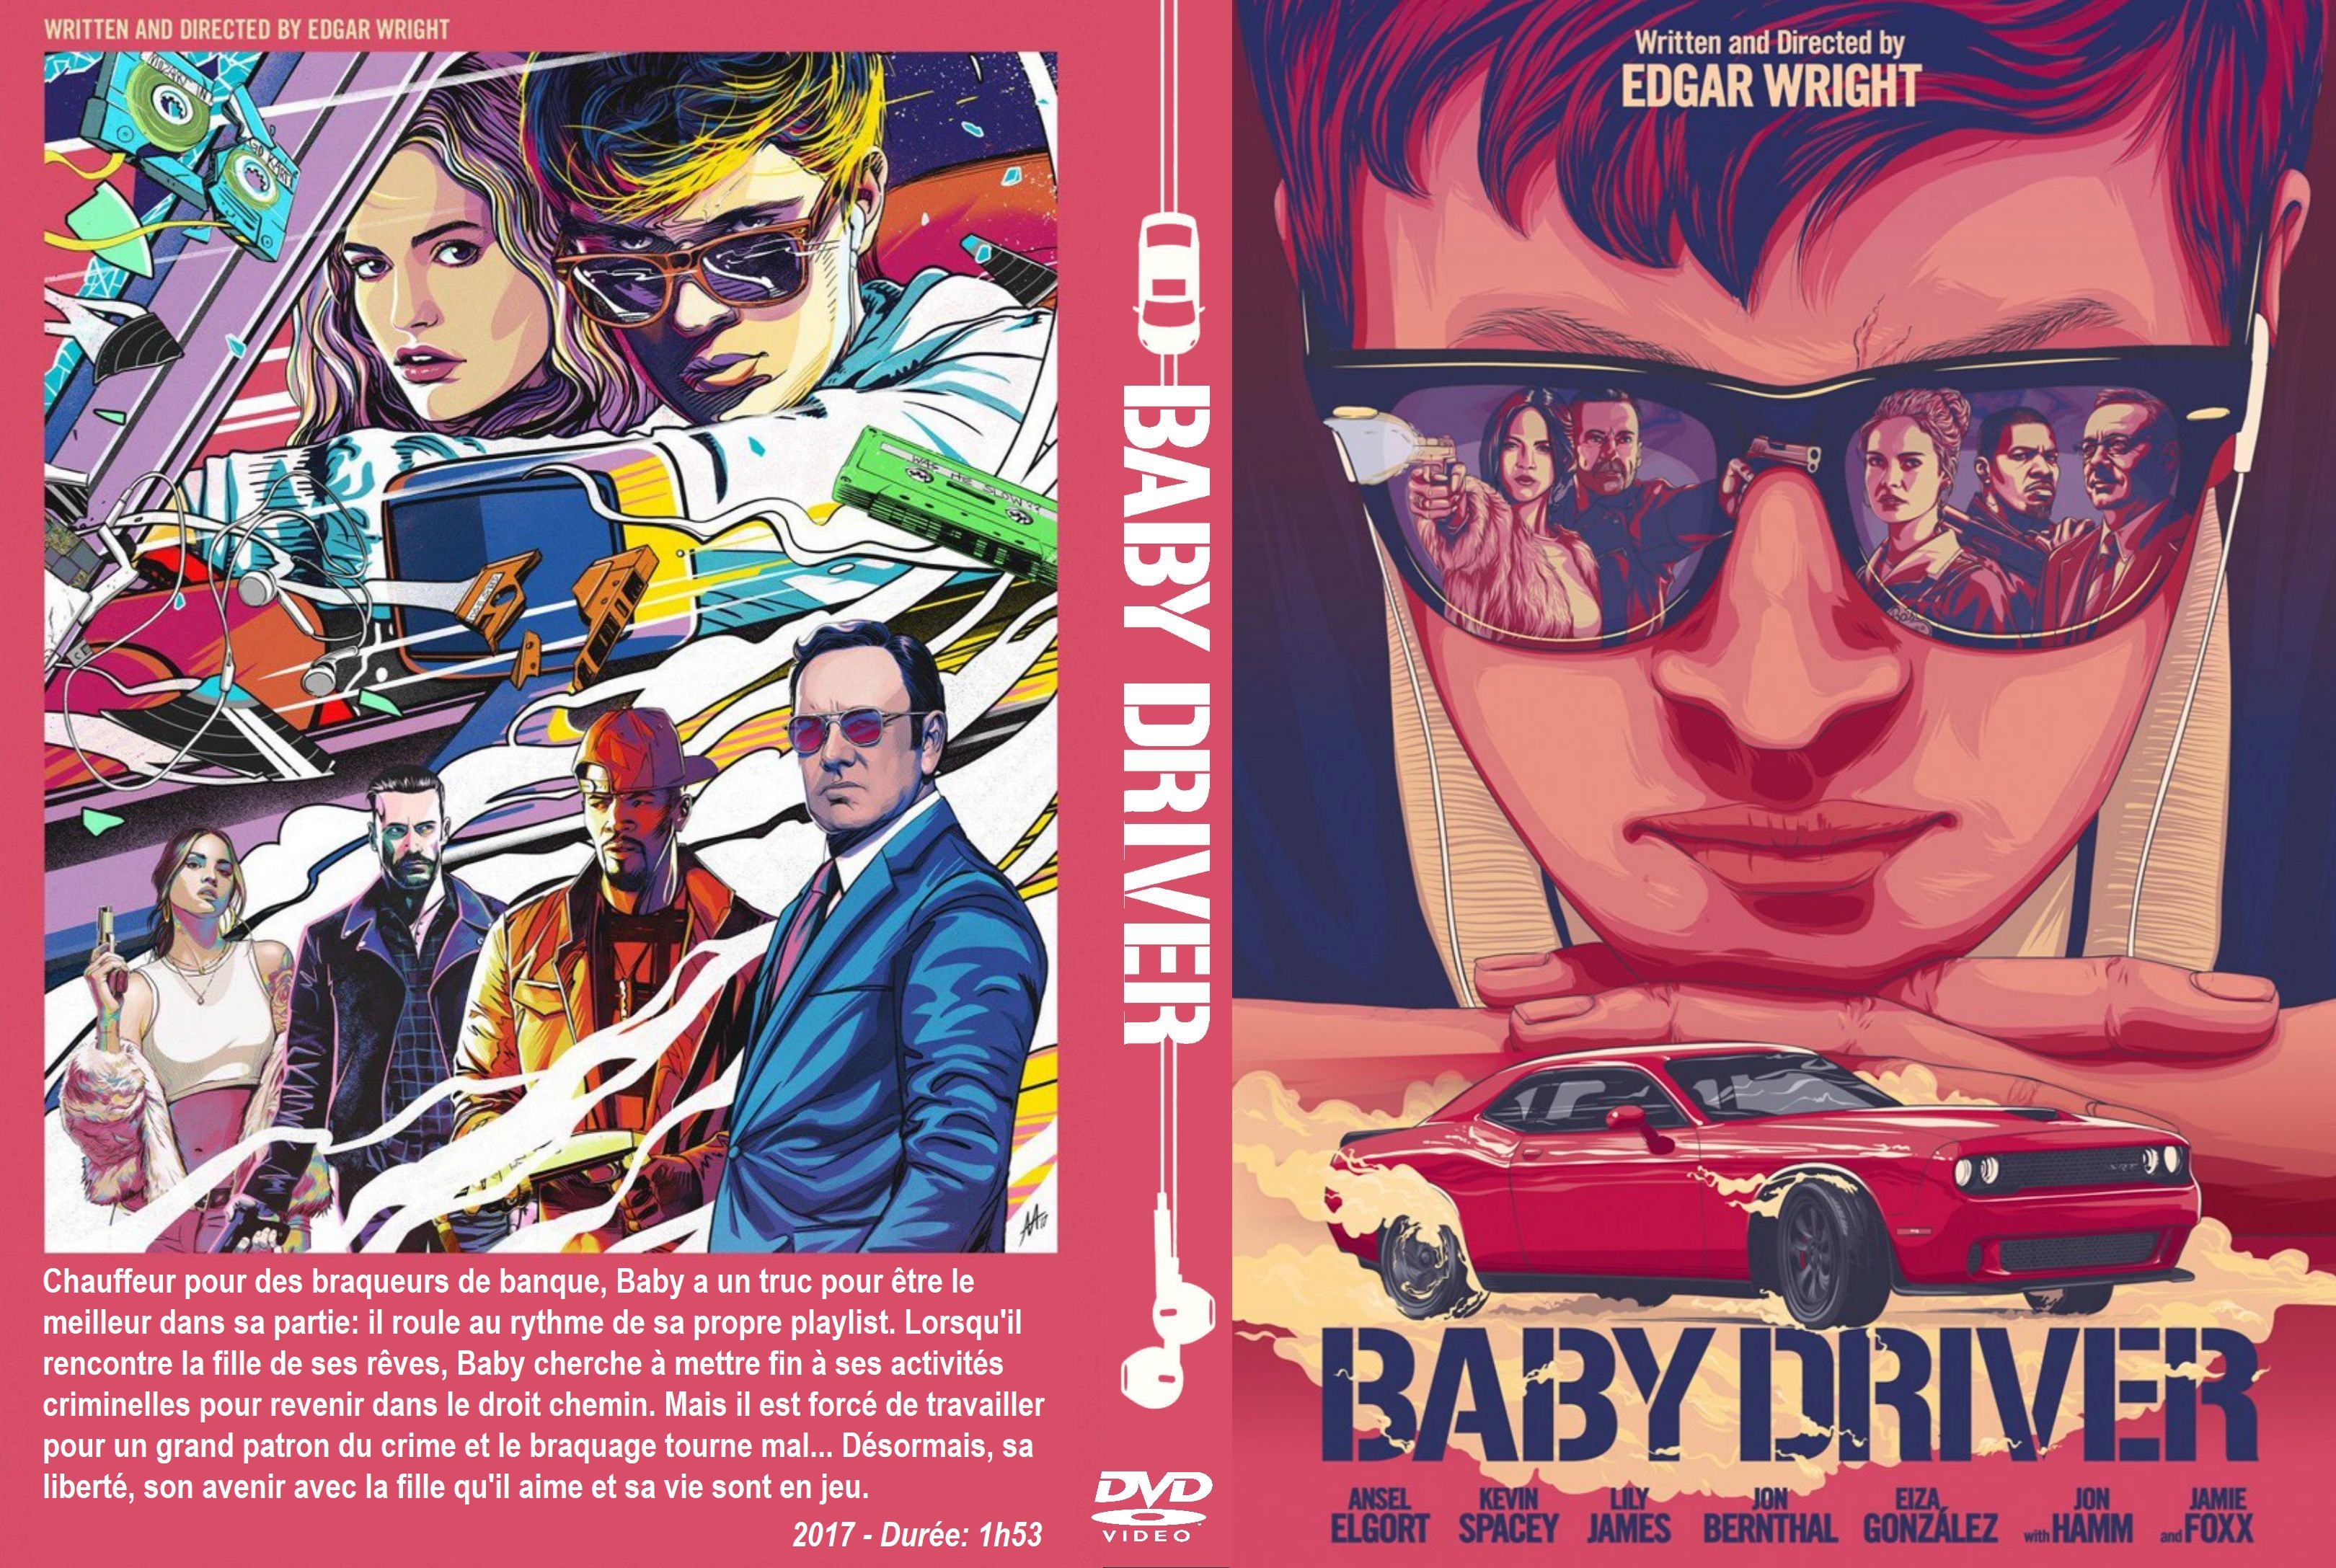 Jaquette DVD Baby Driver custom